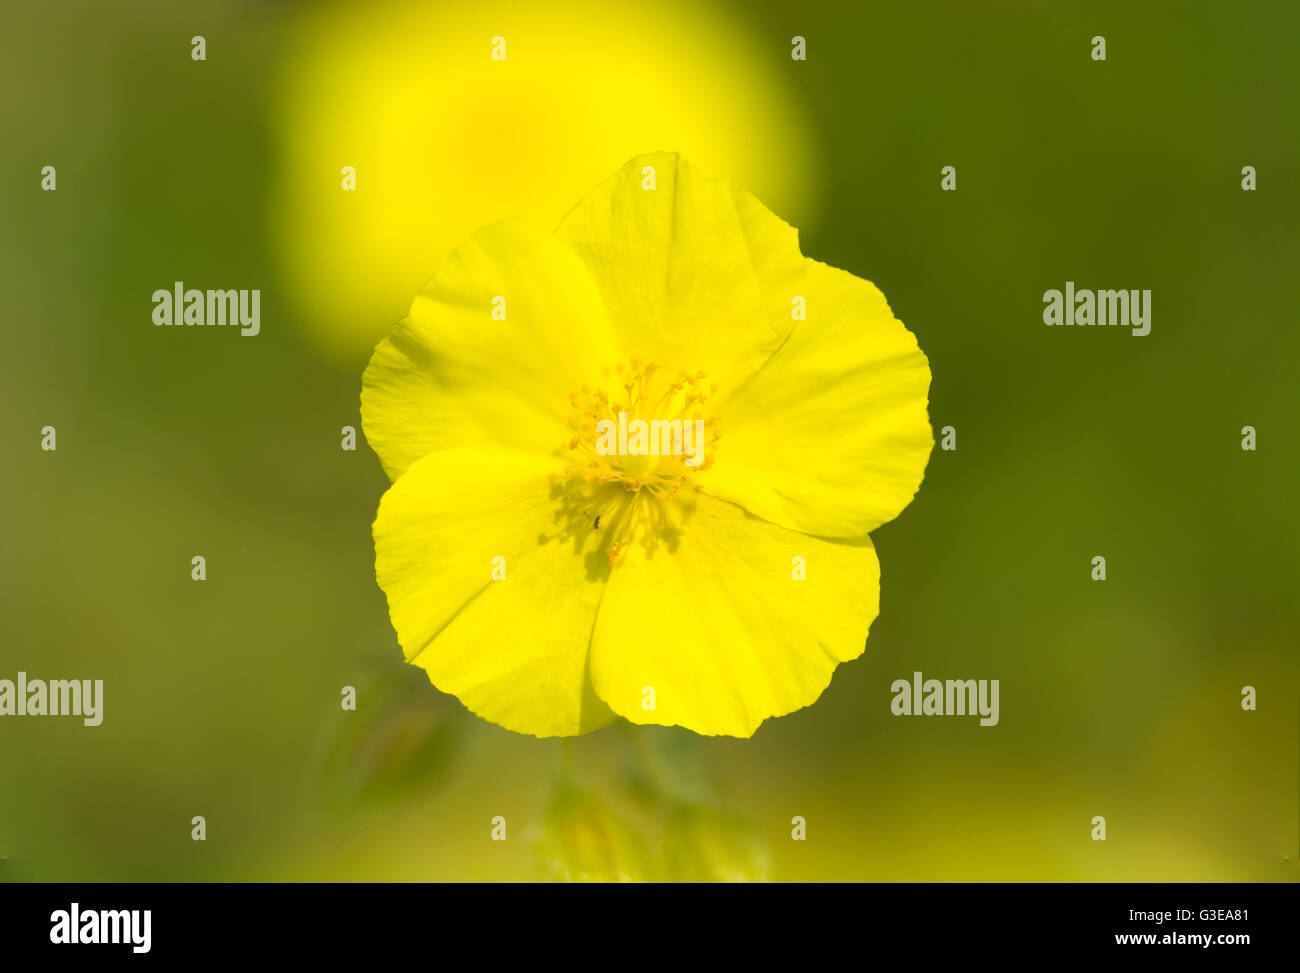 Common rock rose (Helianthemum nummularium). Beautiful delicate yellow flowers of this low growing plant in the family Cistaceae Stock Photo